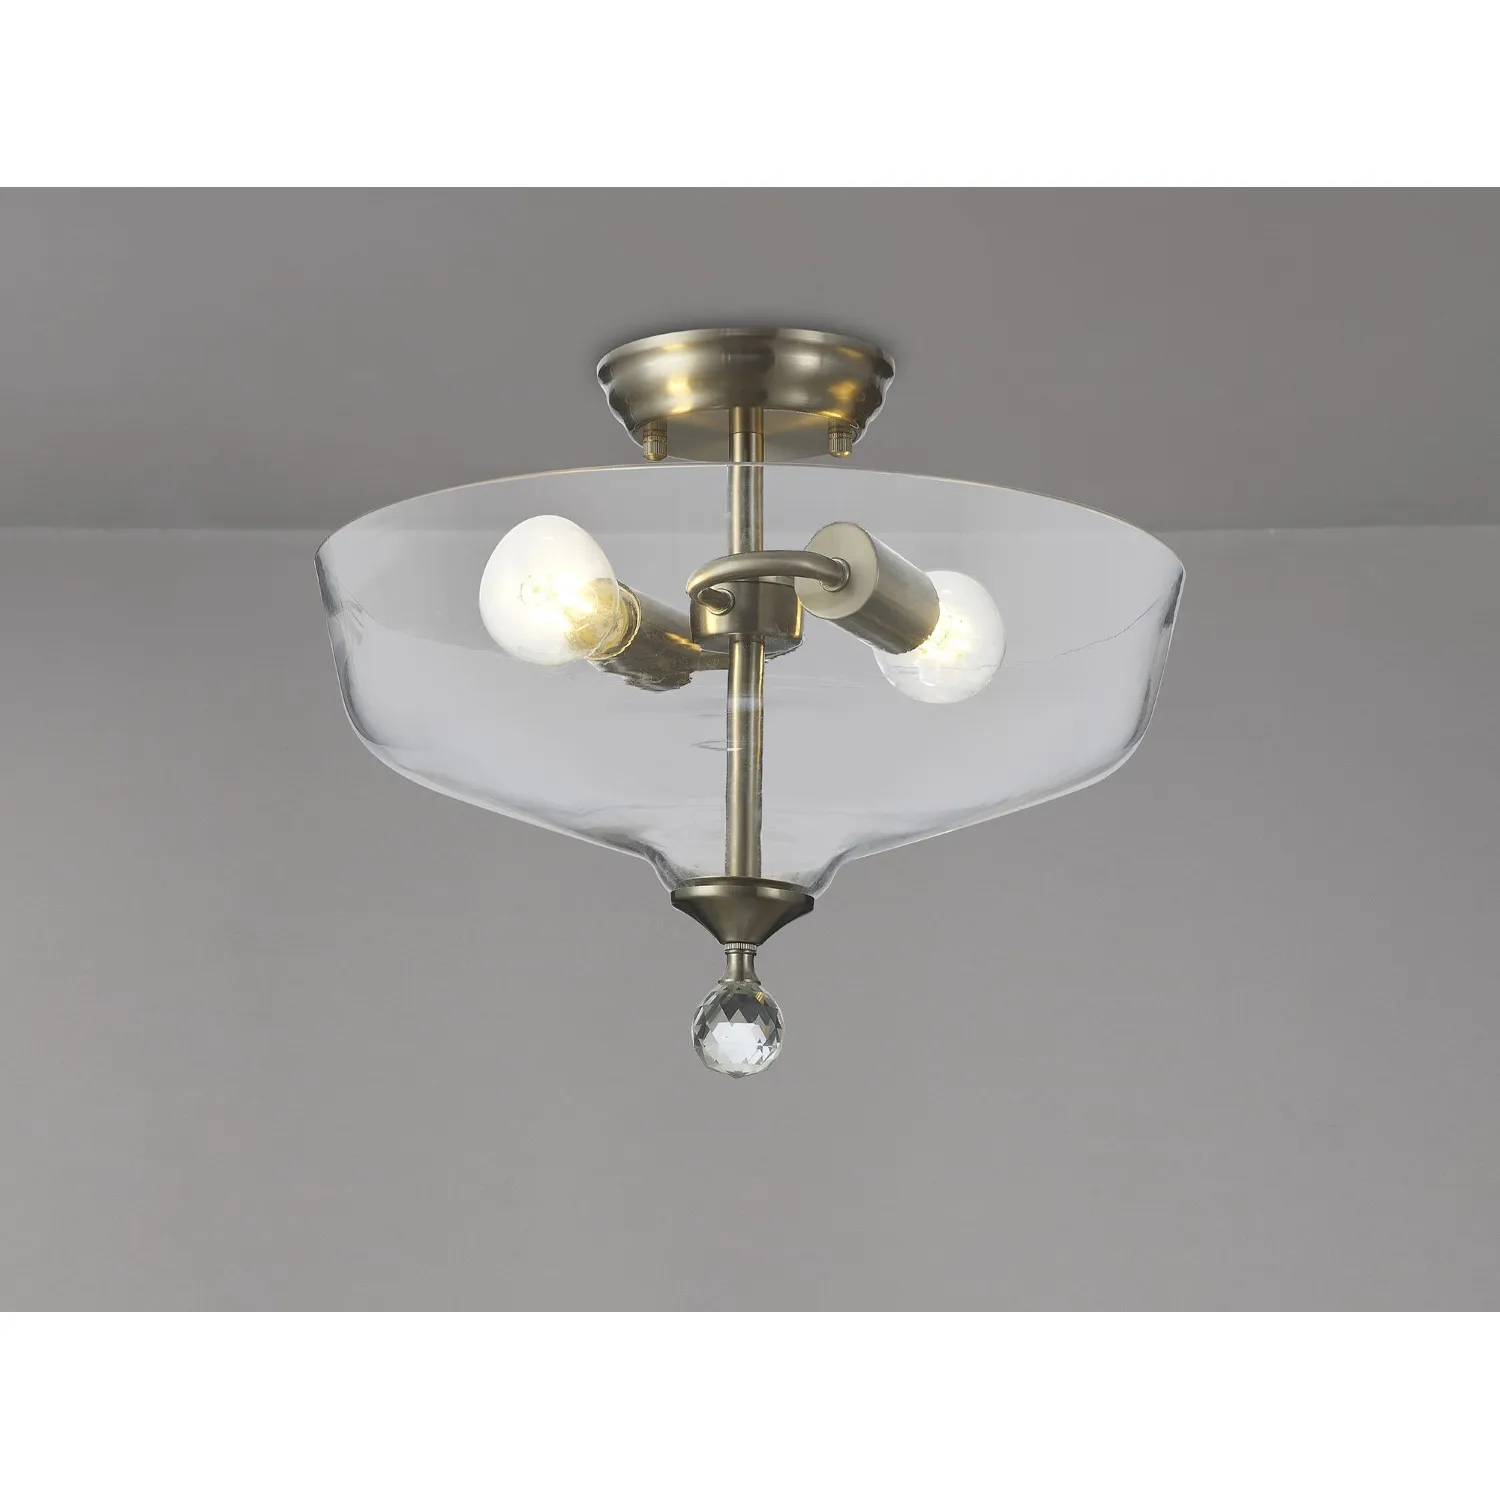 Billericay 2 Light Semi Flush Ceiling E27 With Flat Round 38cm Glass Shade Satin Nickel Clear